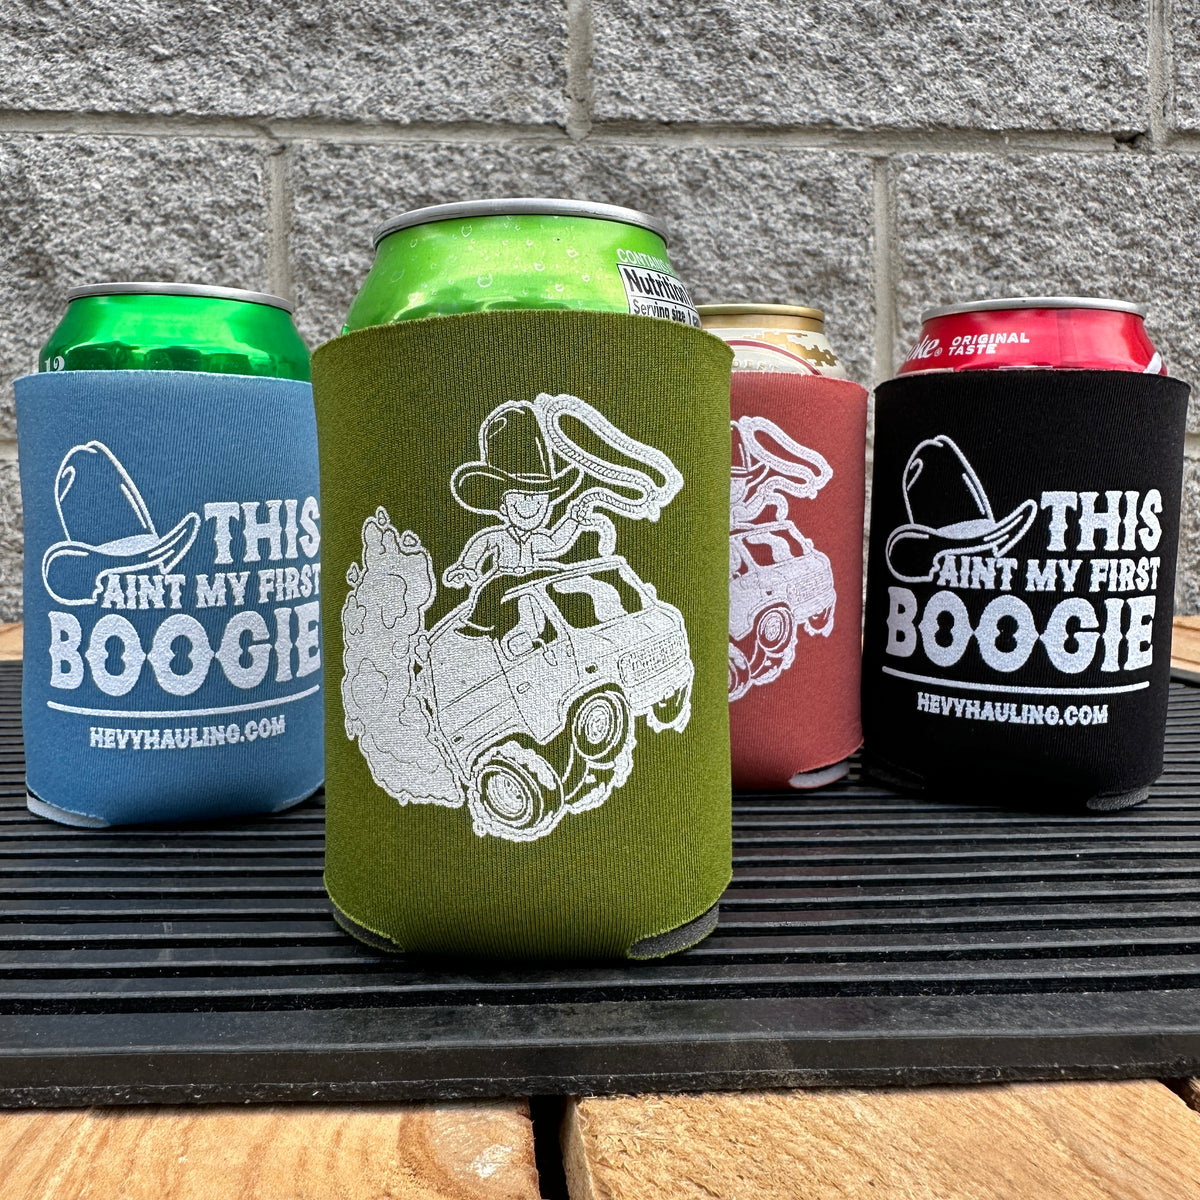 If it's OTB I'm Not Going Metal Can Koozie – Paisley Grace Makery